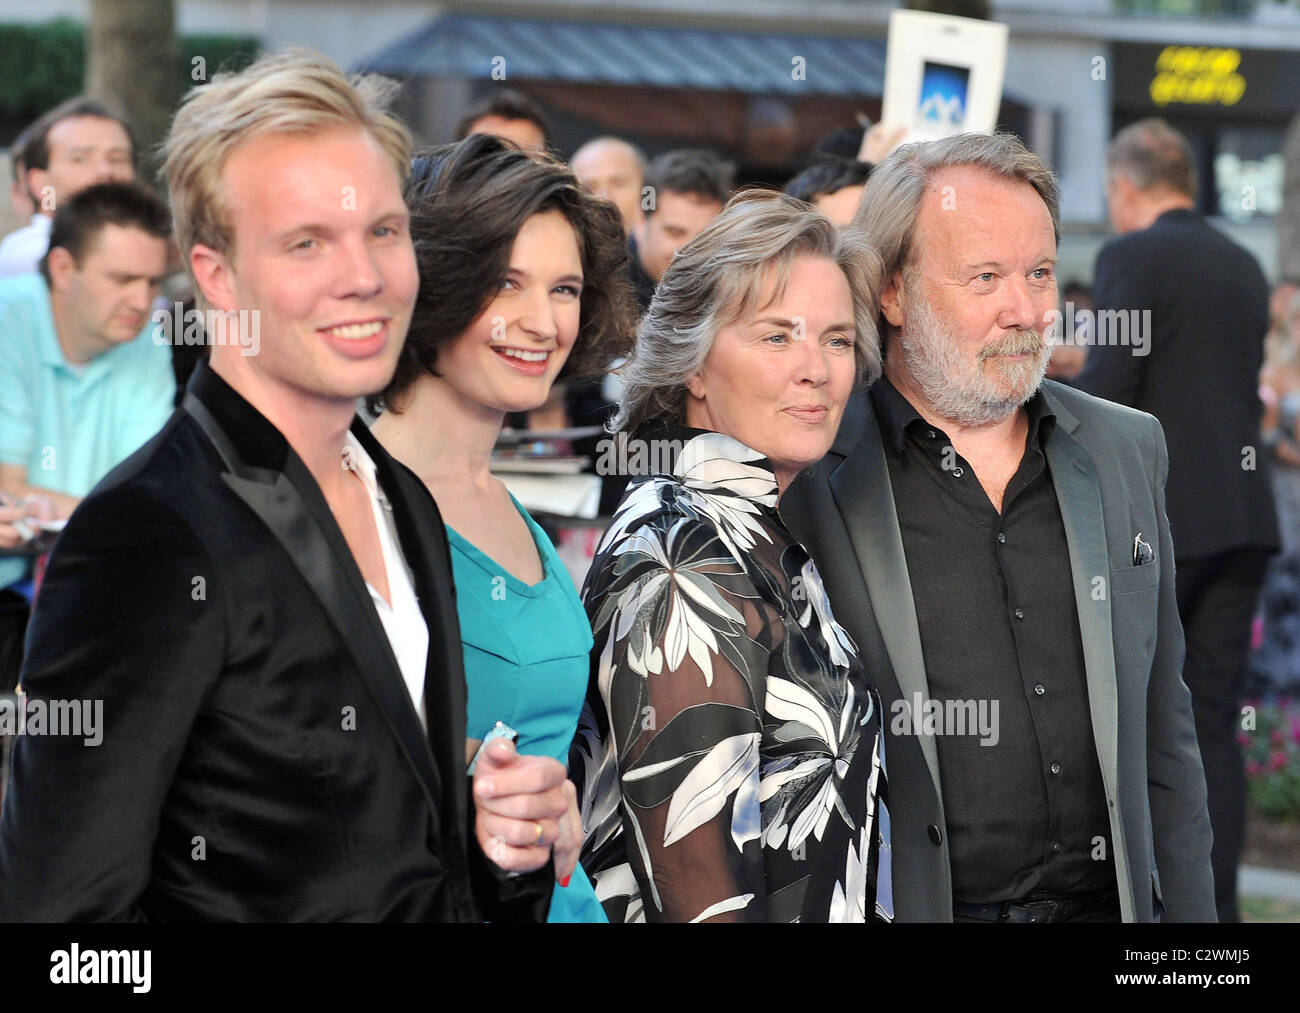 Benny Andersson And Family World Premiere Of Mamma Mia Held At The Odeon Leicester Square Arrivals London England Stock Photo Alamy